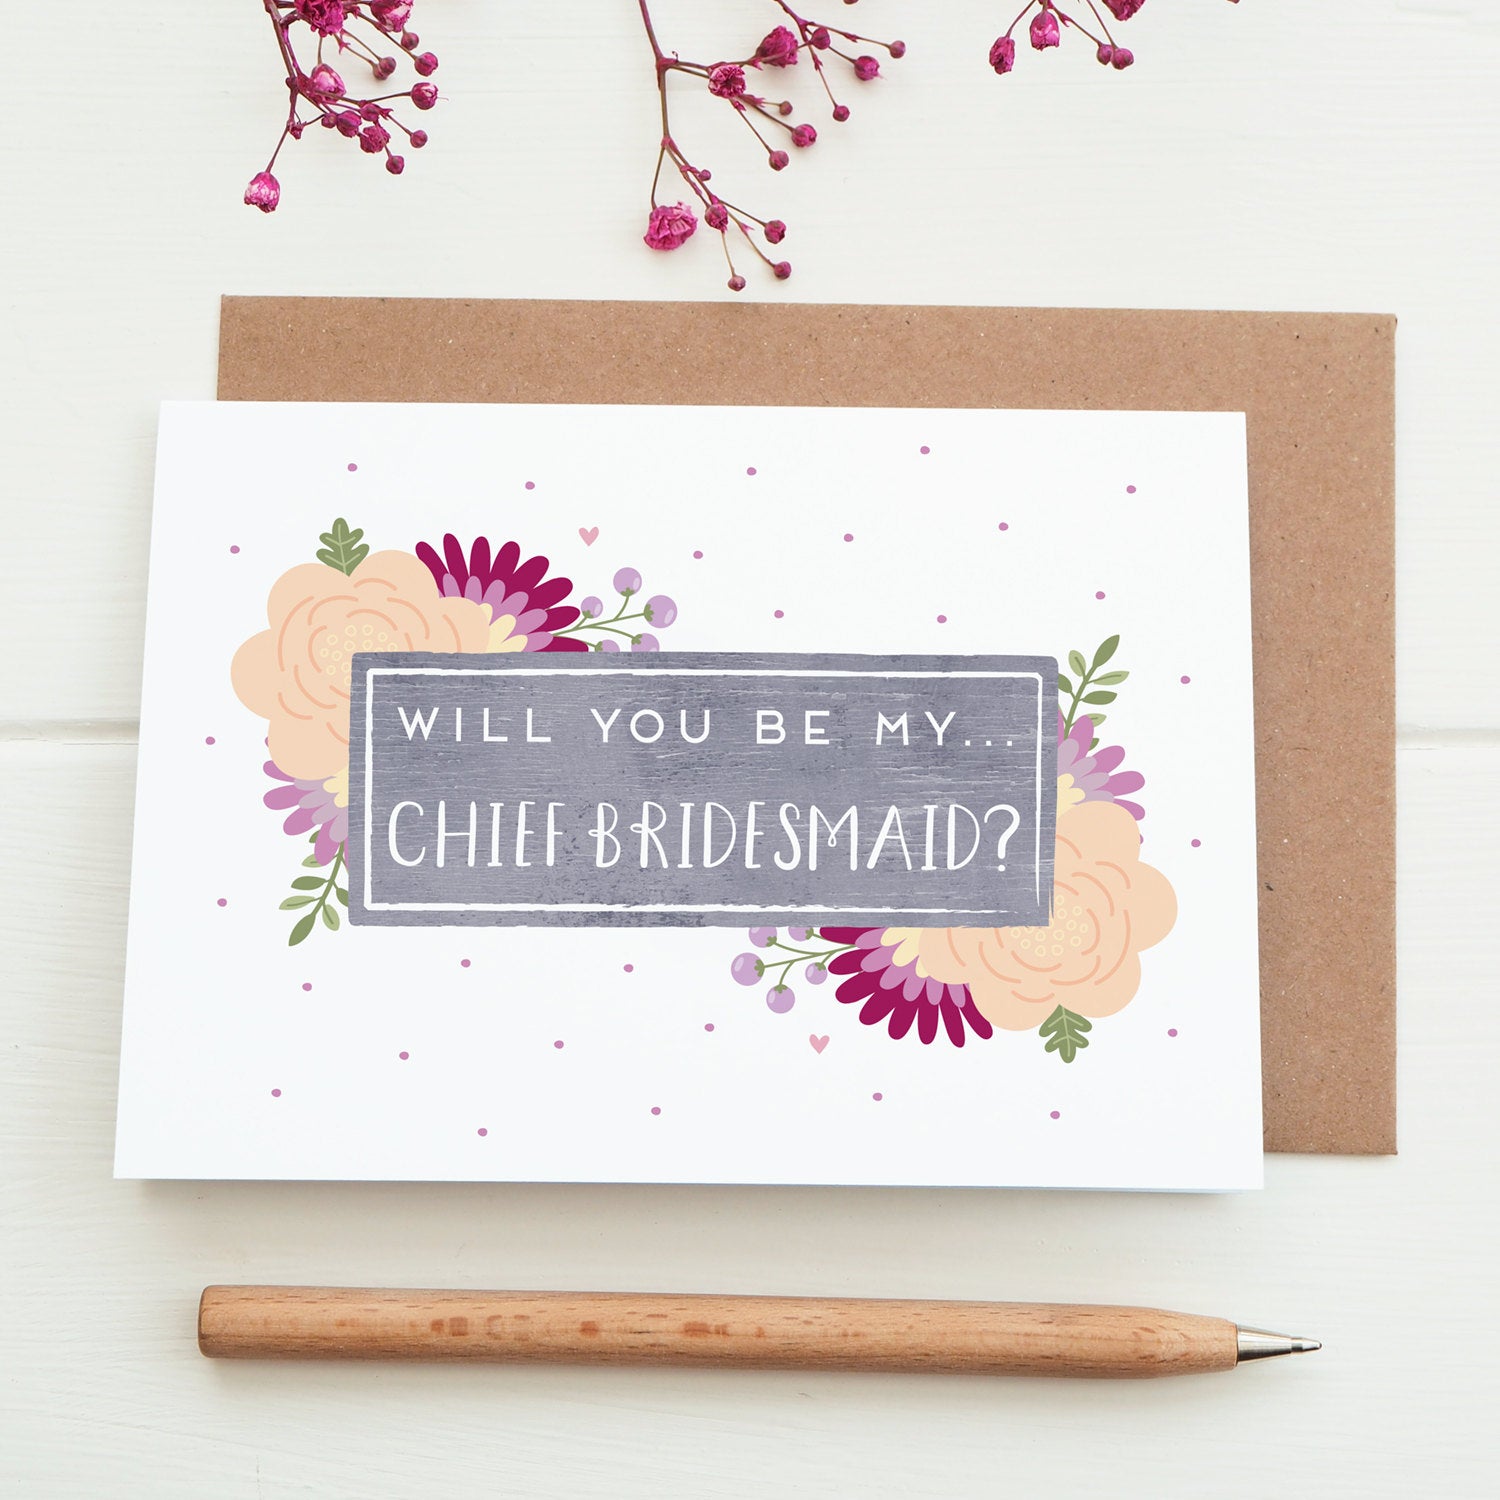 Will you be my chief bridesmaid card in purple